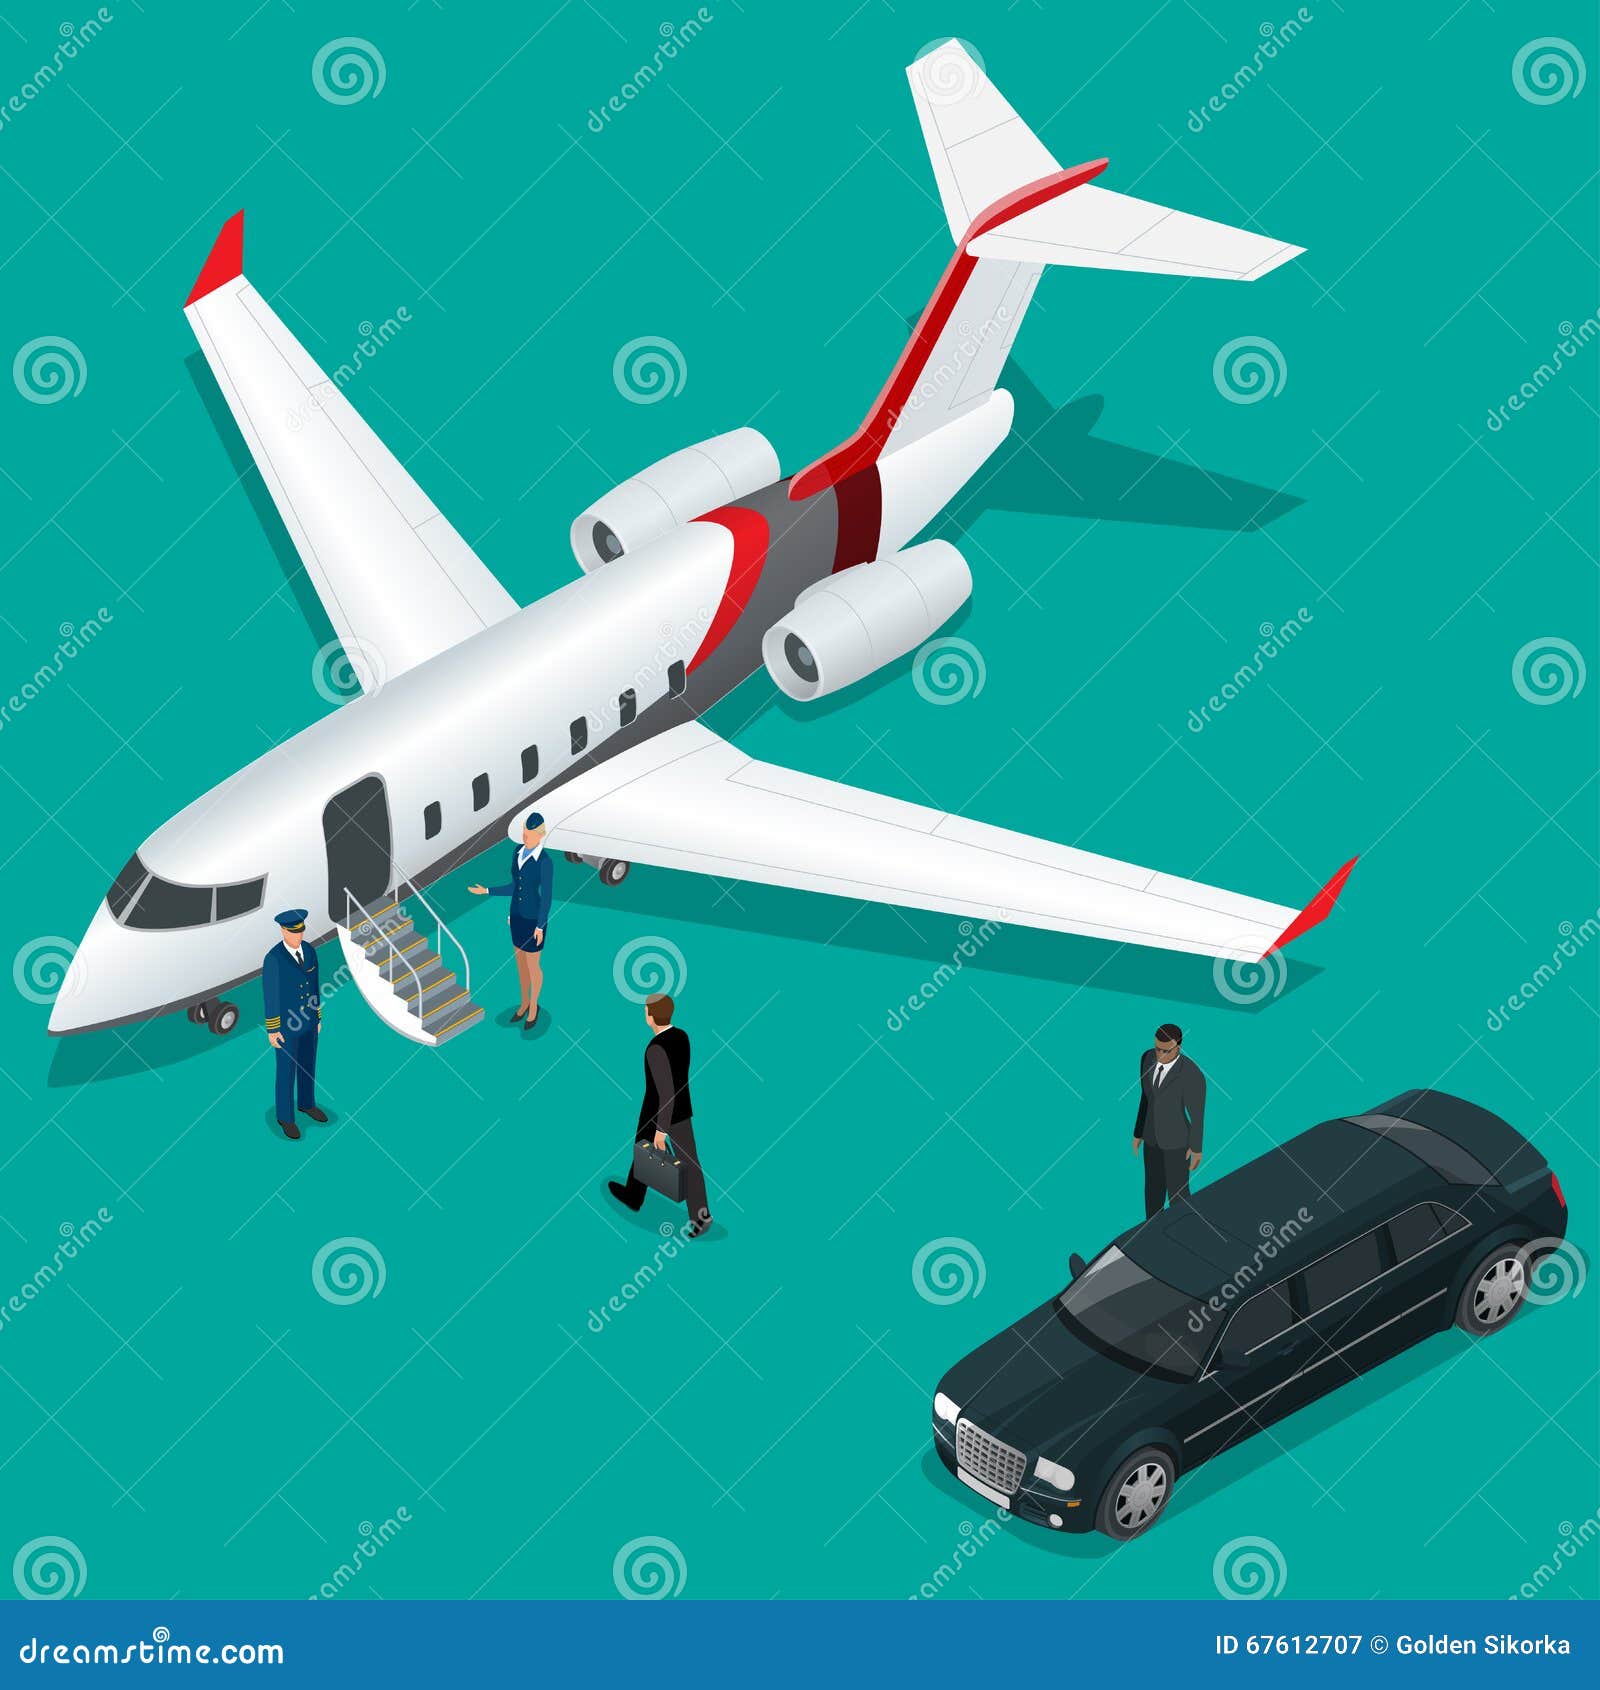 businessman with luggage walking towards private jet at terminal. bussines concept stewardess, pilot, limousine